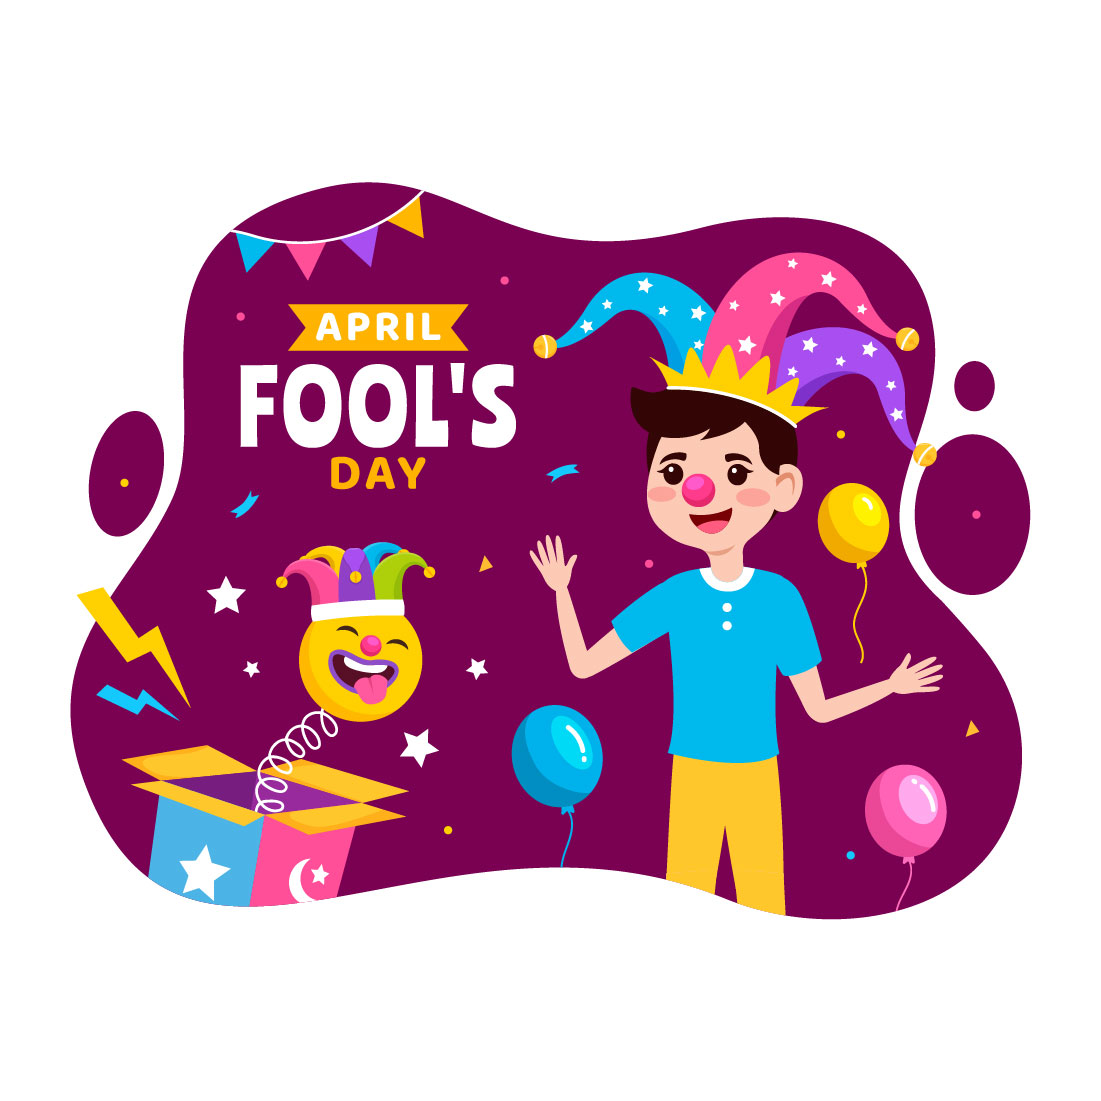 12 Happy April Fools Day Illustration cover image.